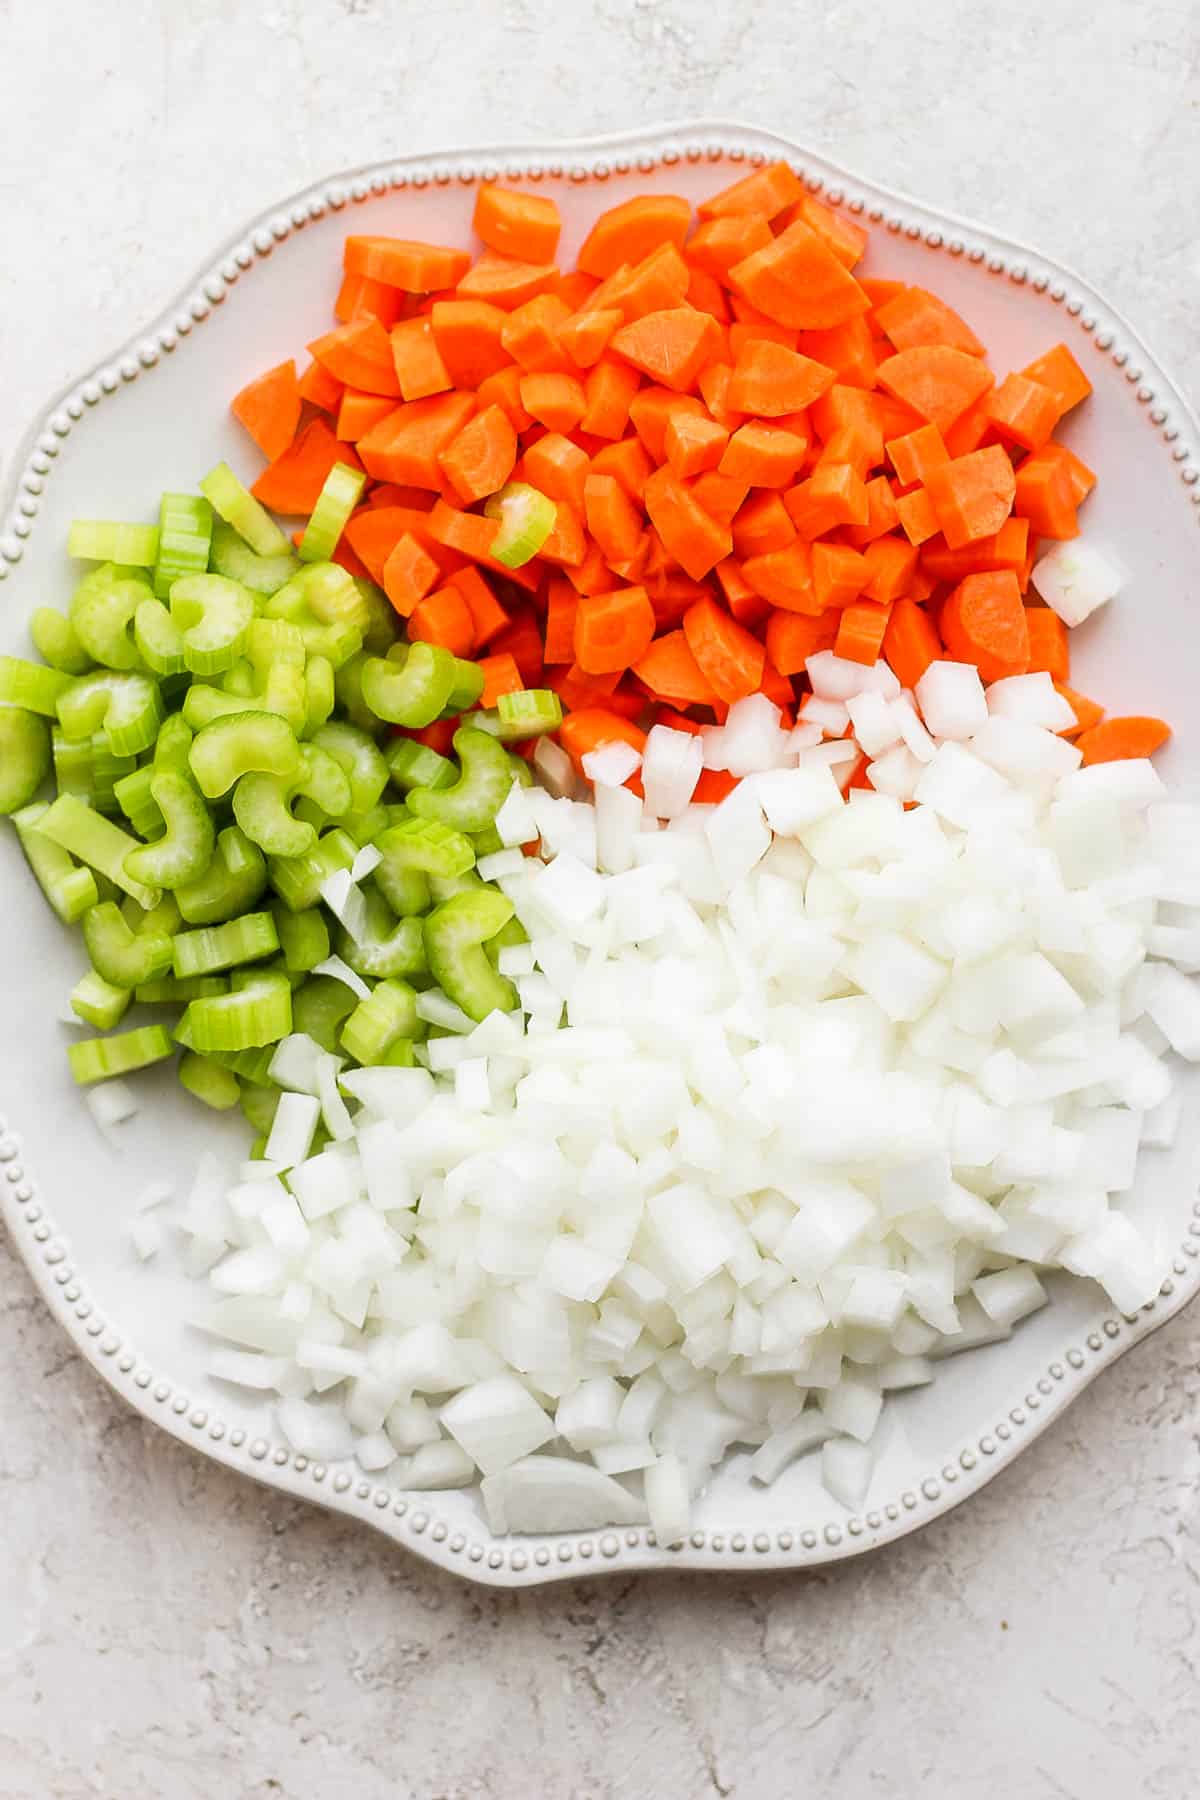 Diced onion, chopped carrots, and chopped celery on a white plate.